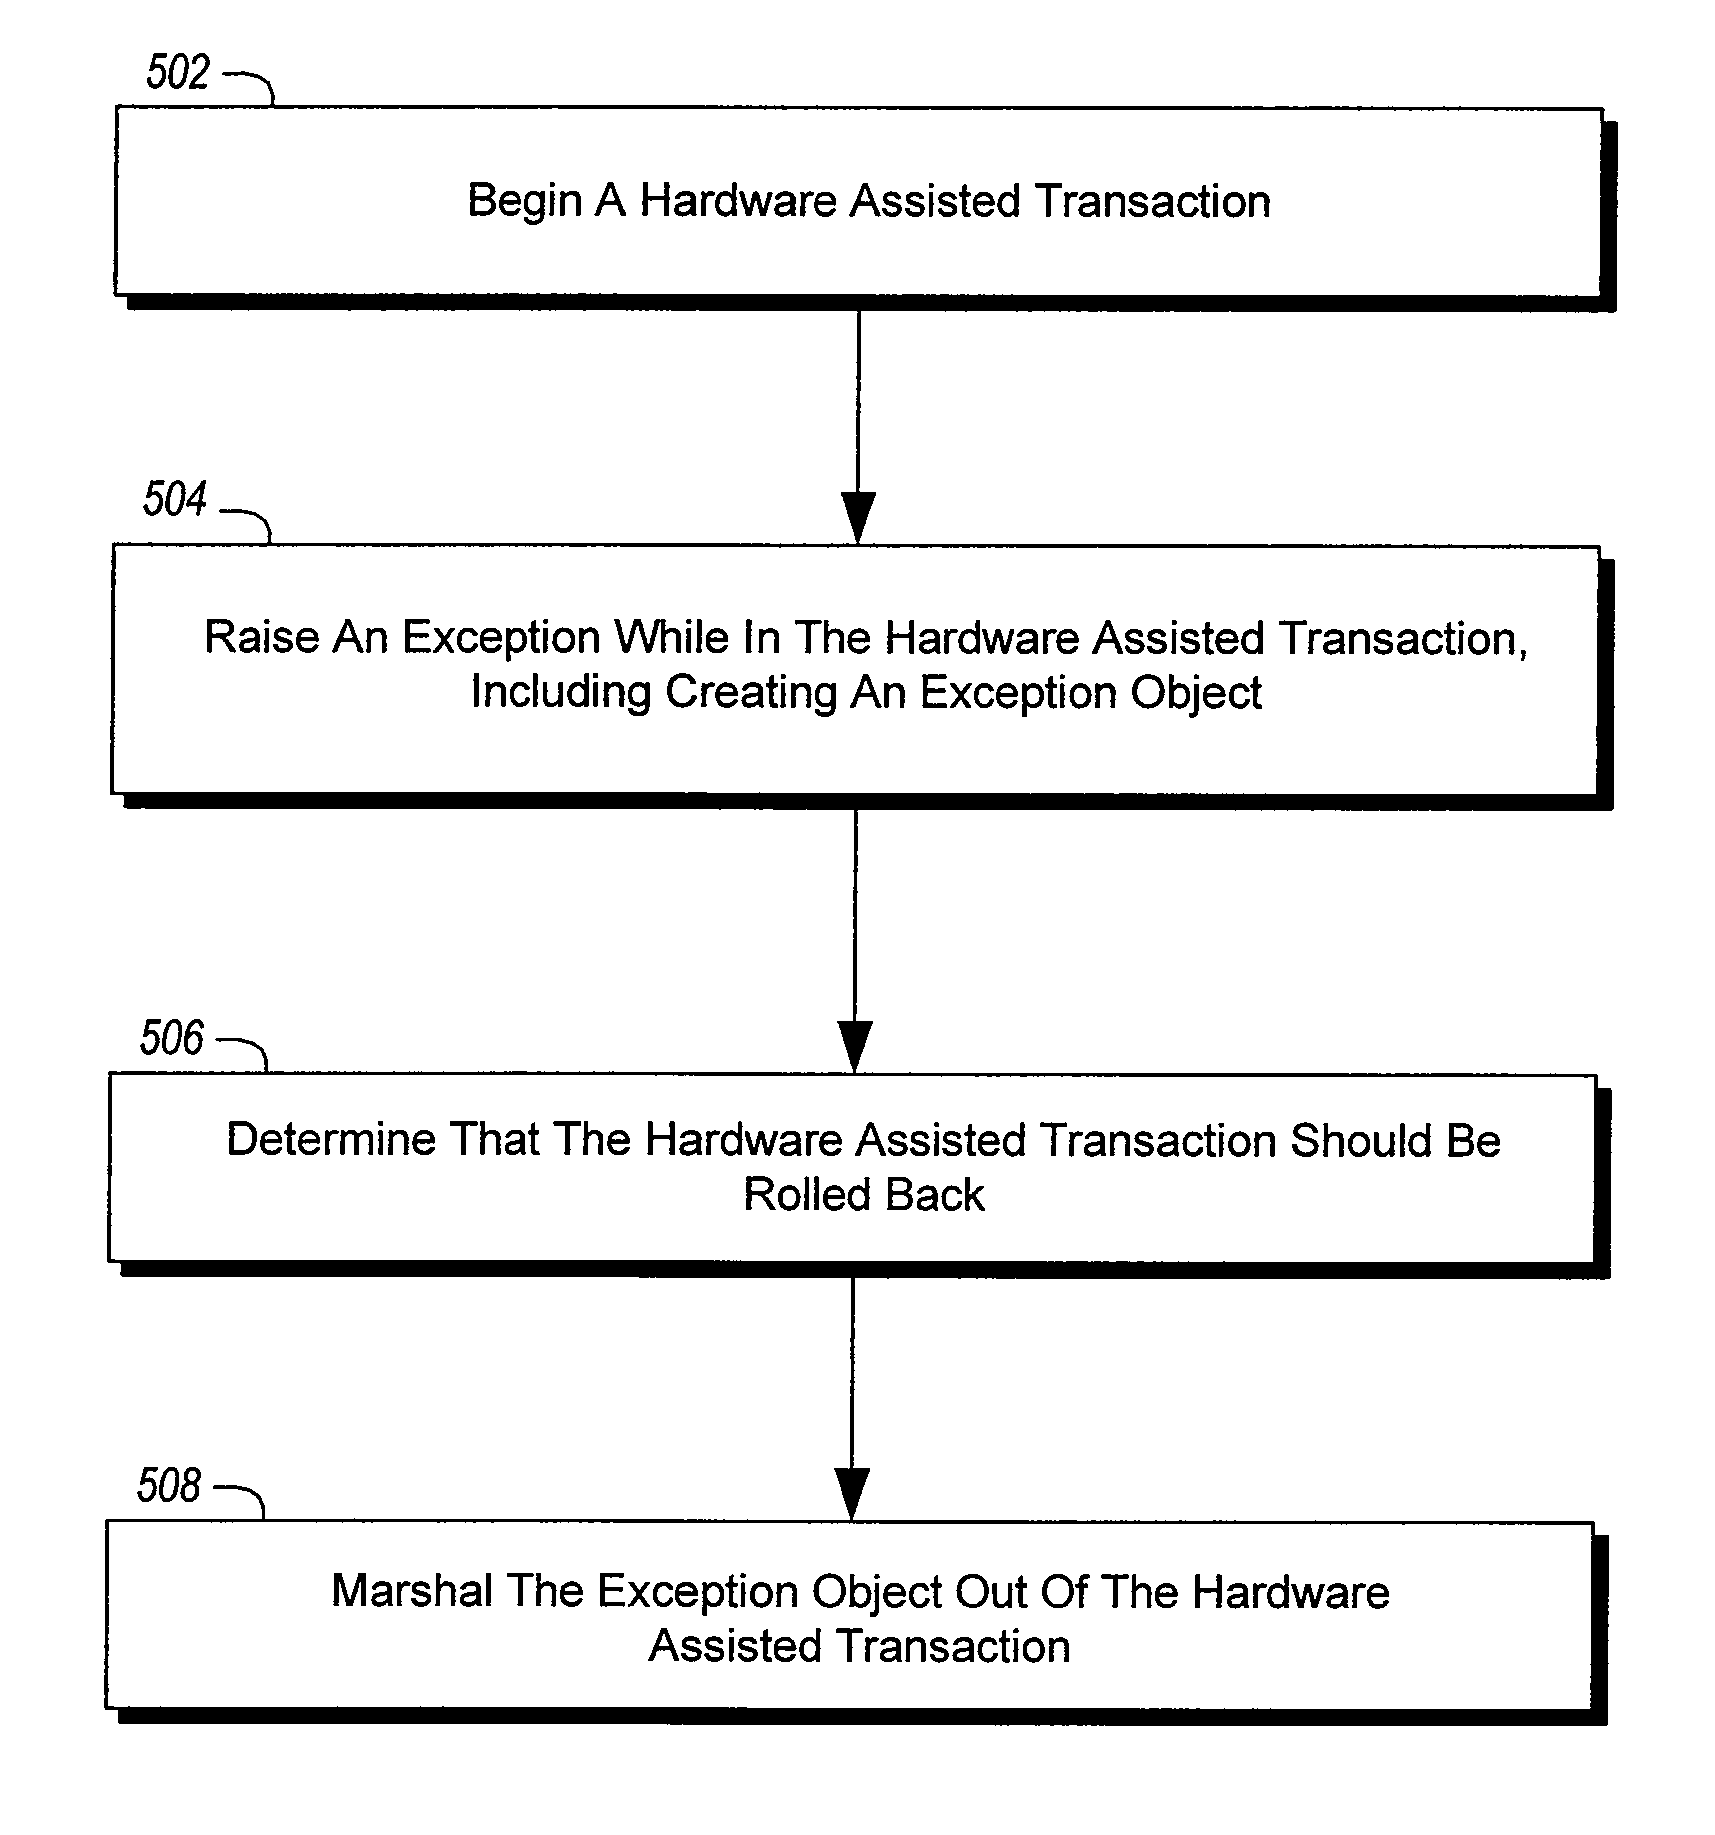 Efficient garbage collection and exception handling in a hardware accelerated transactional memory system